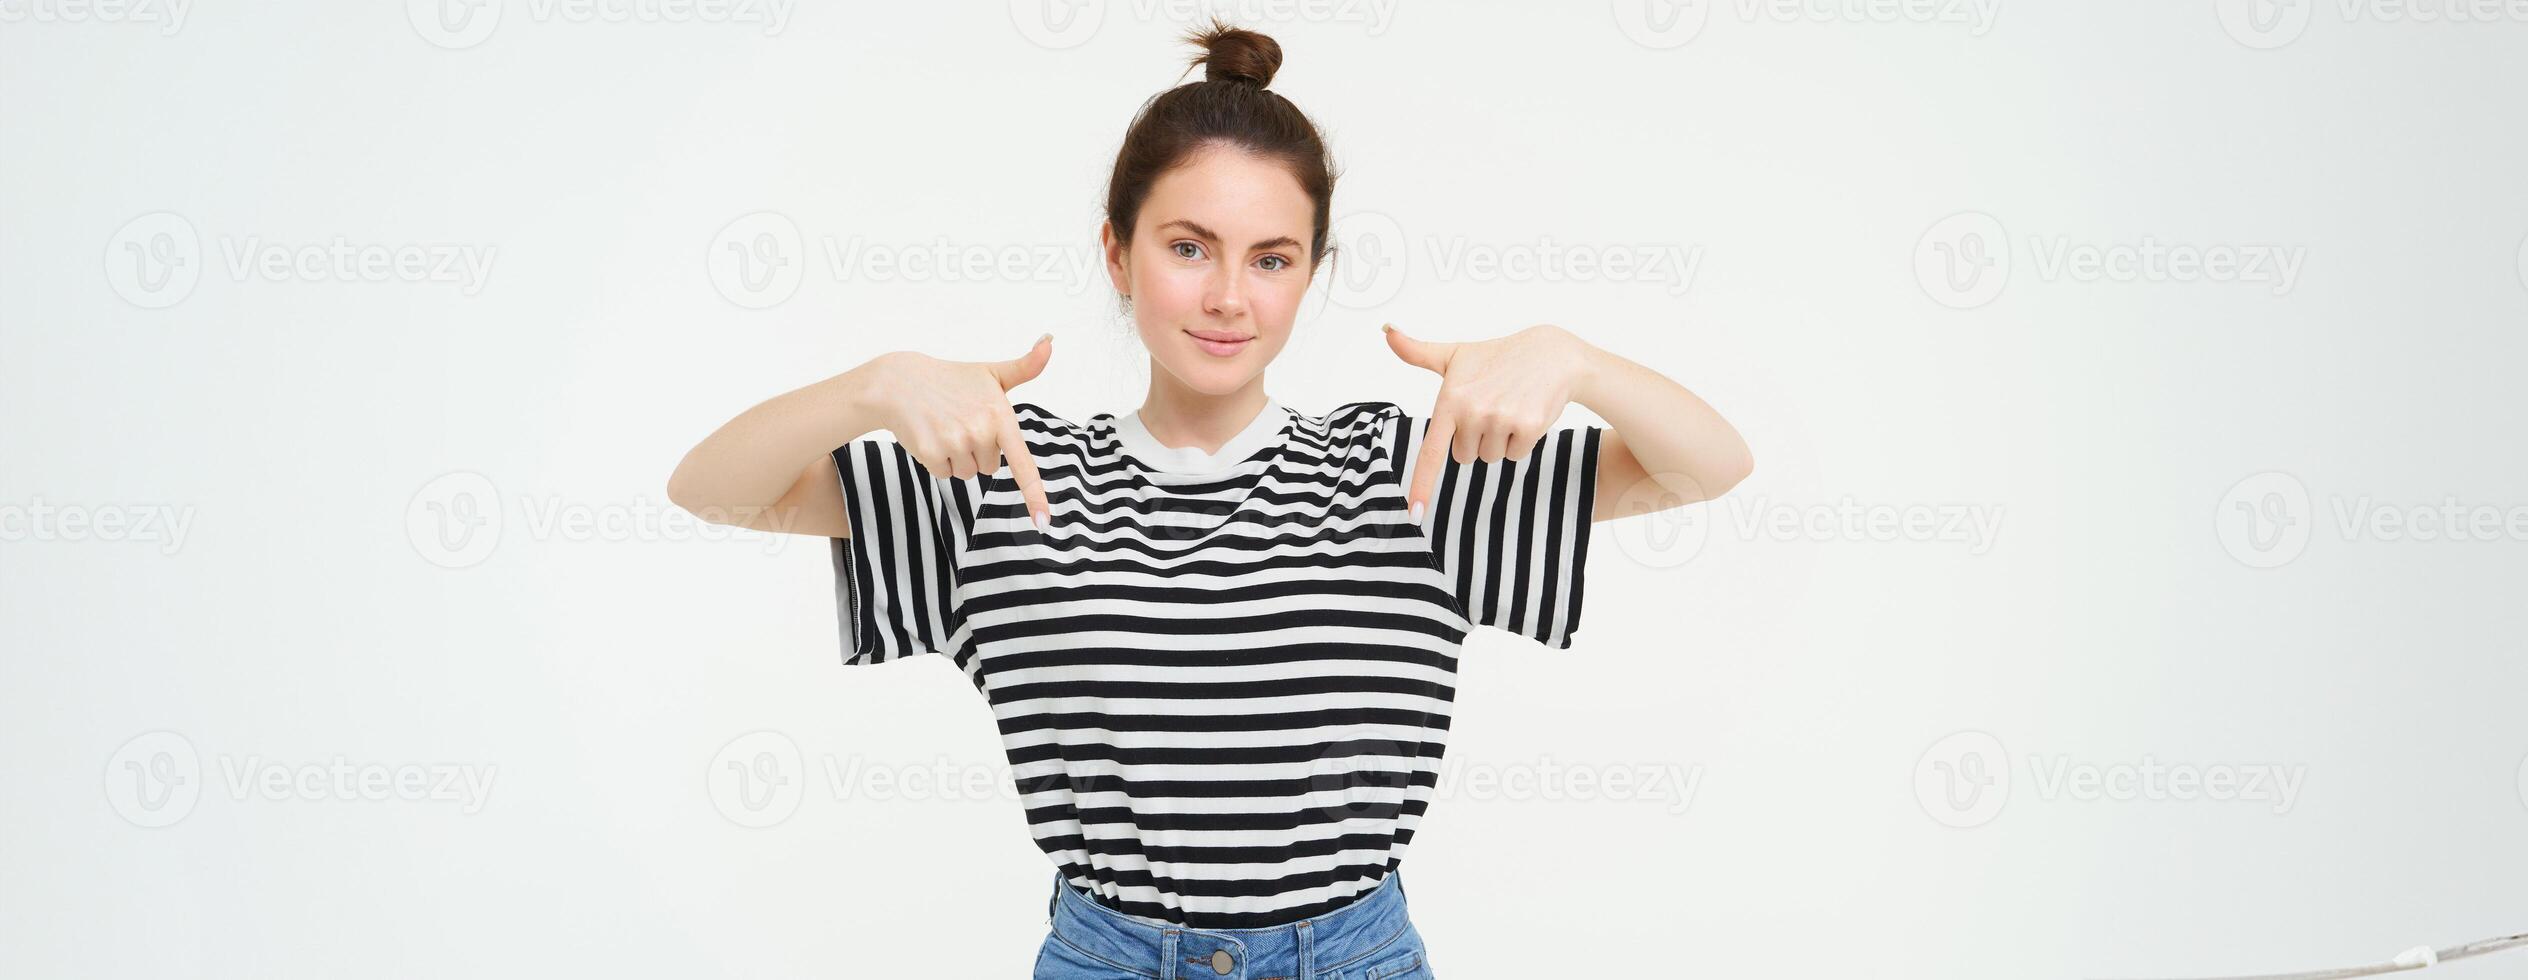 Portrait of confident, smiling brunette woman, pointing fingers down, showing banner on bottom, follow link below gesture, standing over white background photo